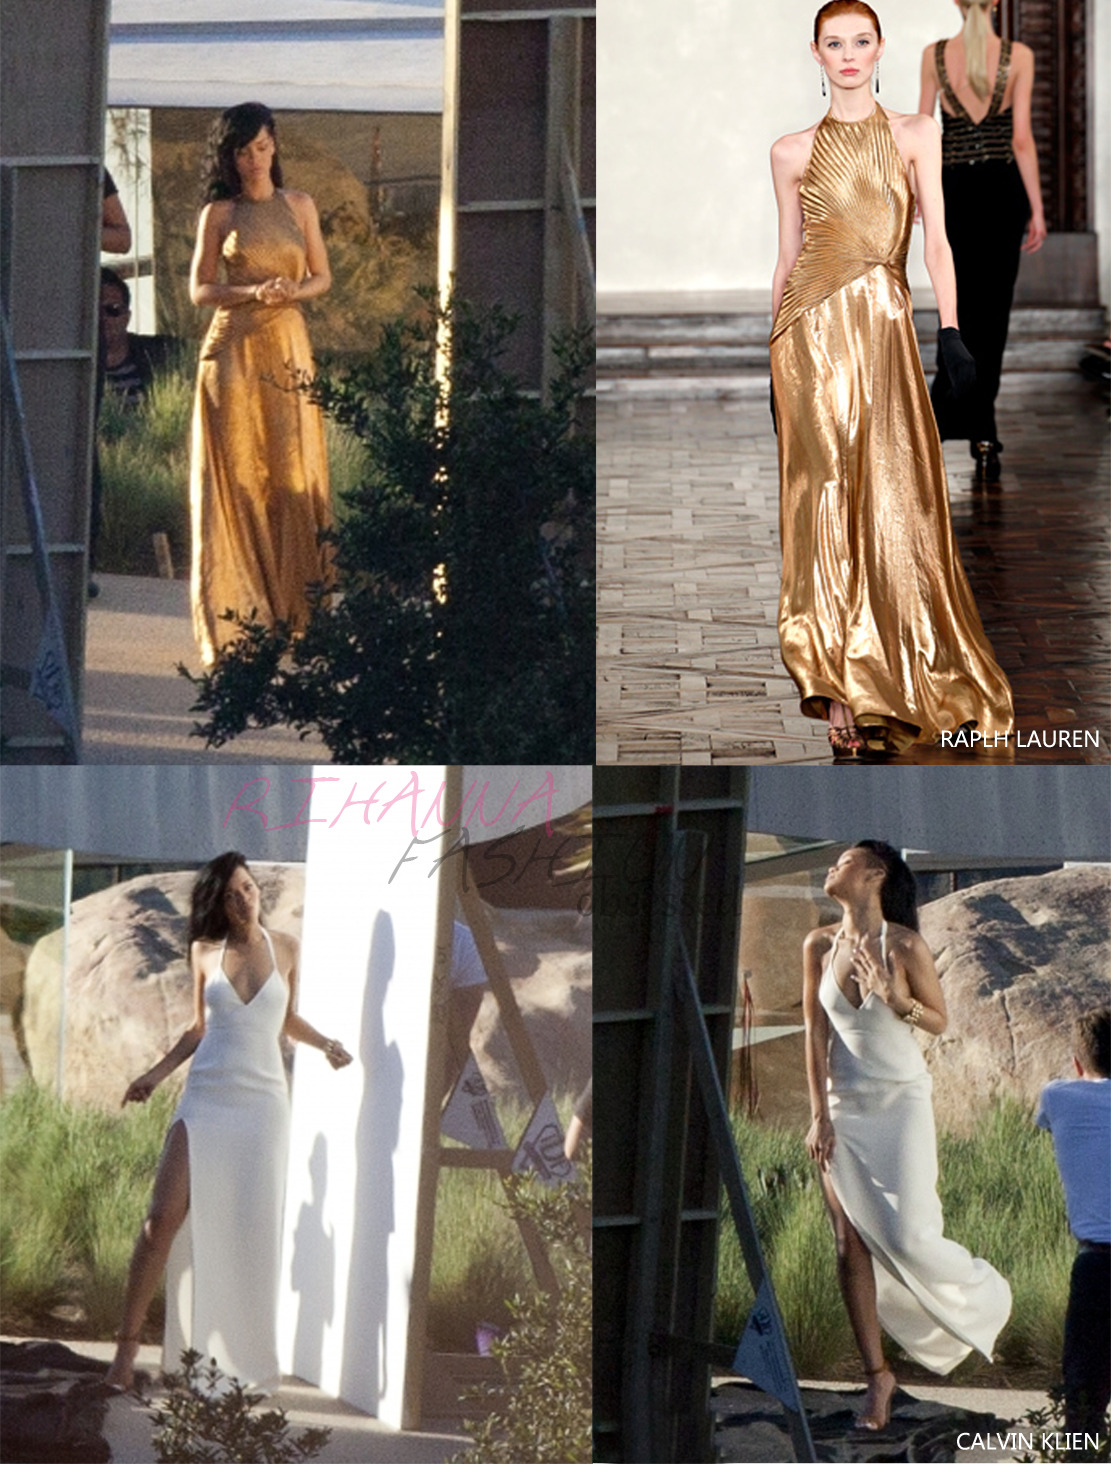 Rihanna during her very first Harper&#8217;s Bazaar cover shoot. Spotted in gold pleated detailed gown by designer Ralph Lauren from the fall 2012 collection and in a costom made white gown by Calvin Klien collection